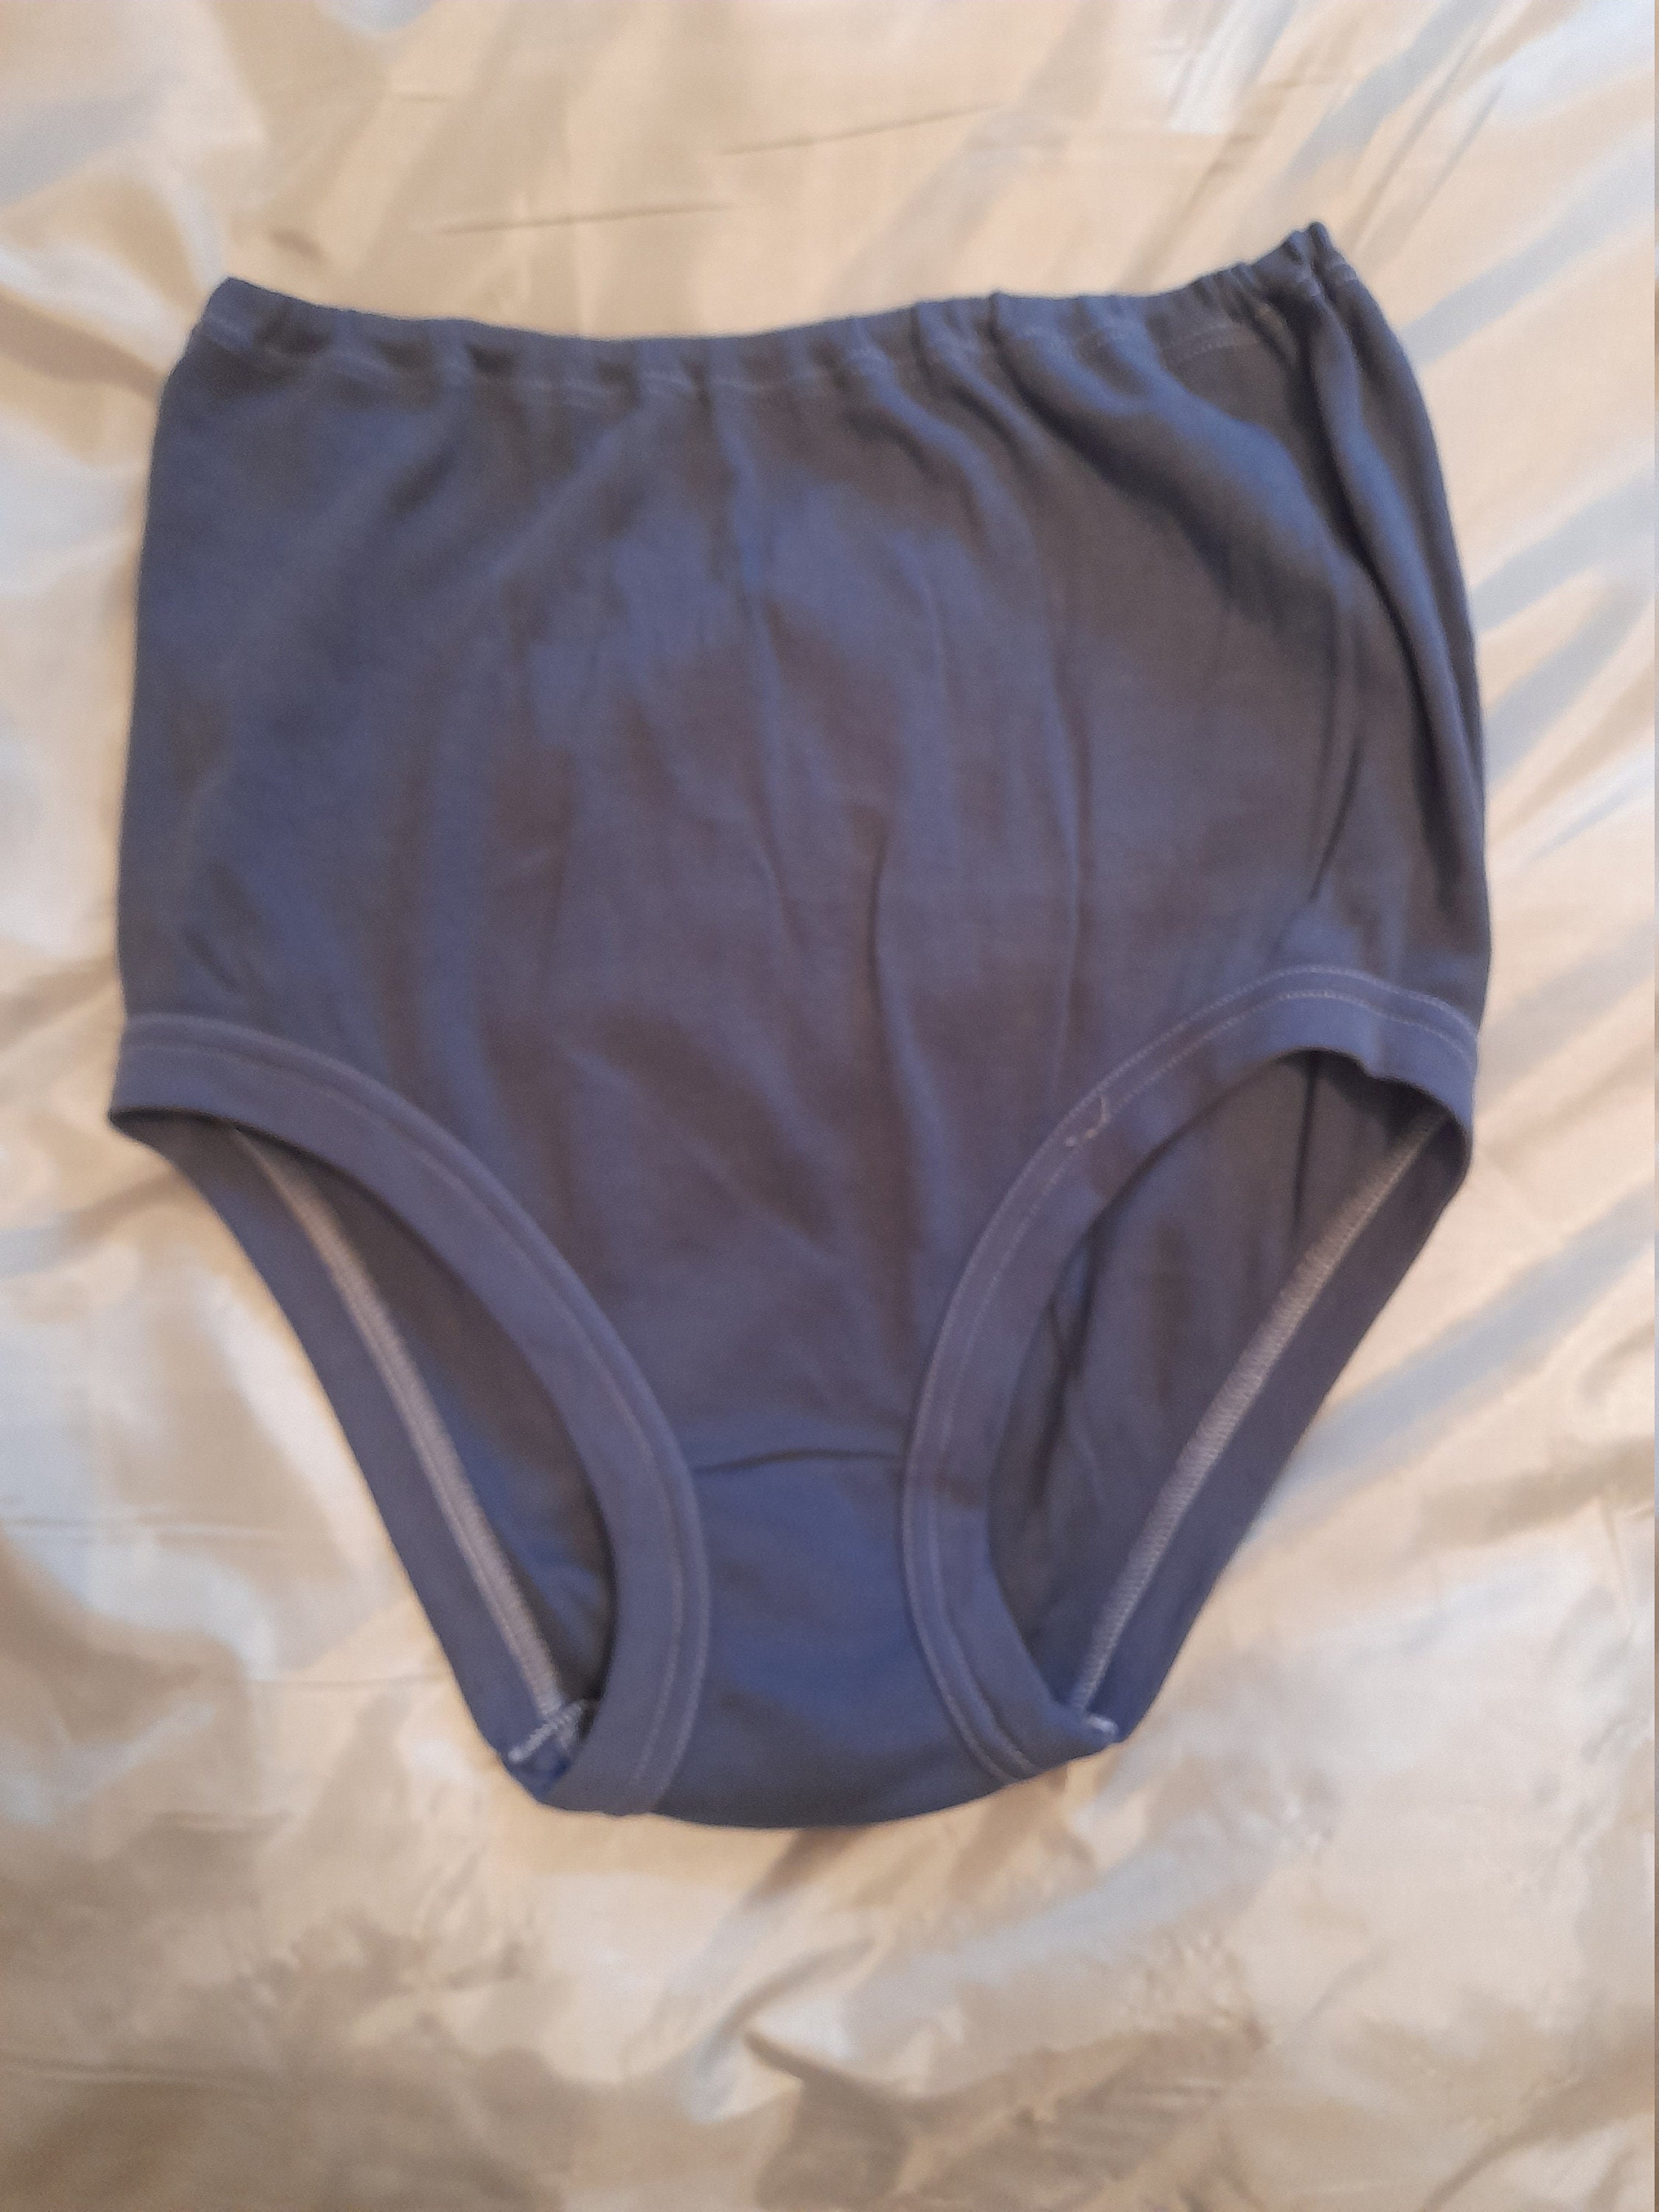 Vintage 1960s School Knickers, Netball Panties Briefs Navy Blue Size Extra  Large